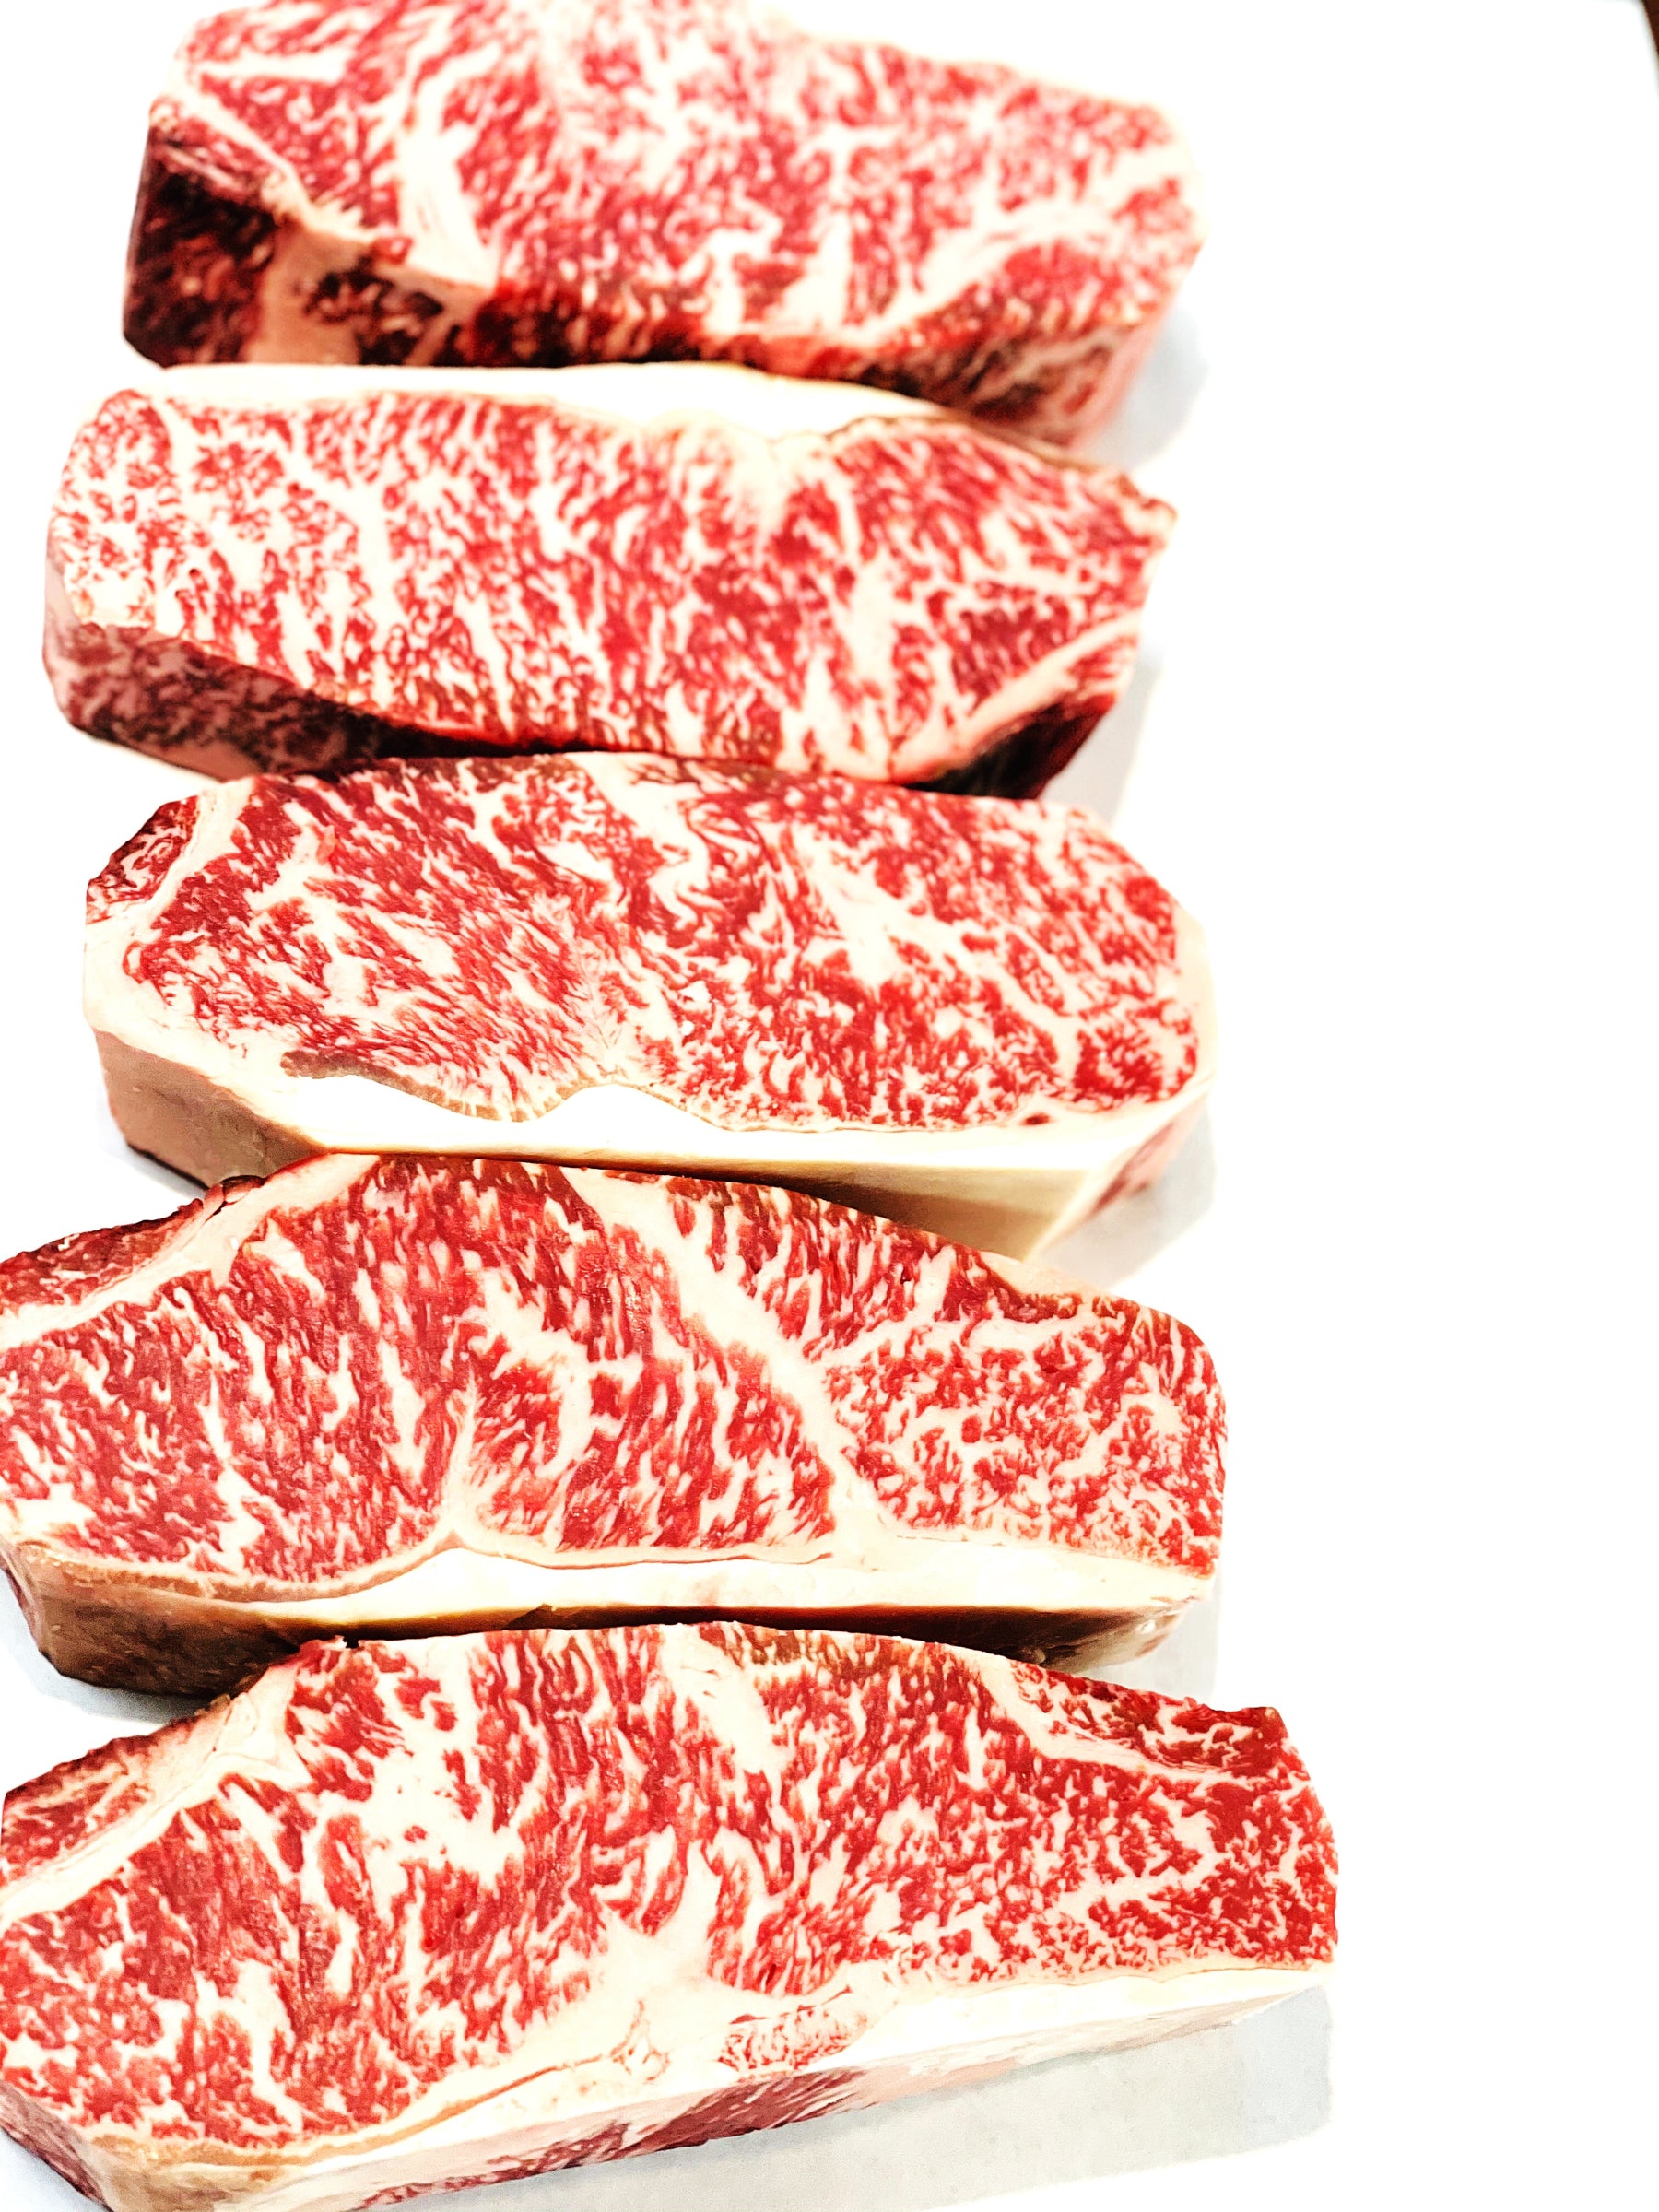 Wagyu-Beef, Great Meats, Meat Delivery